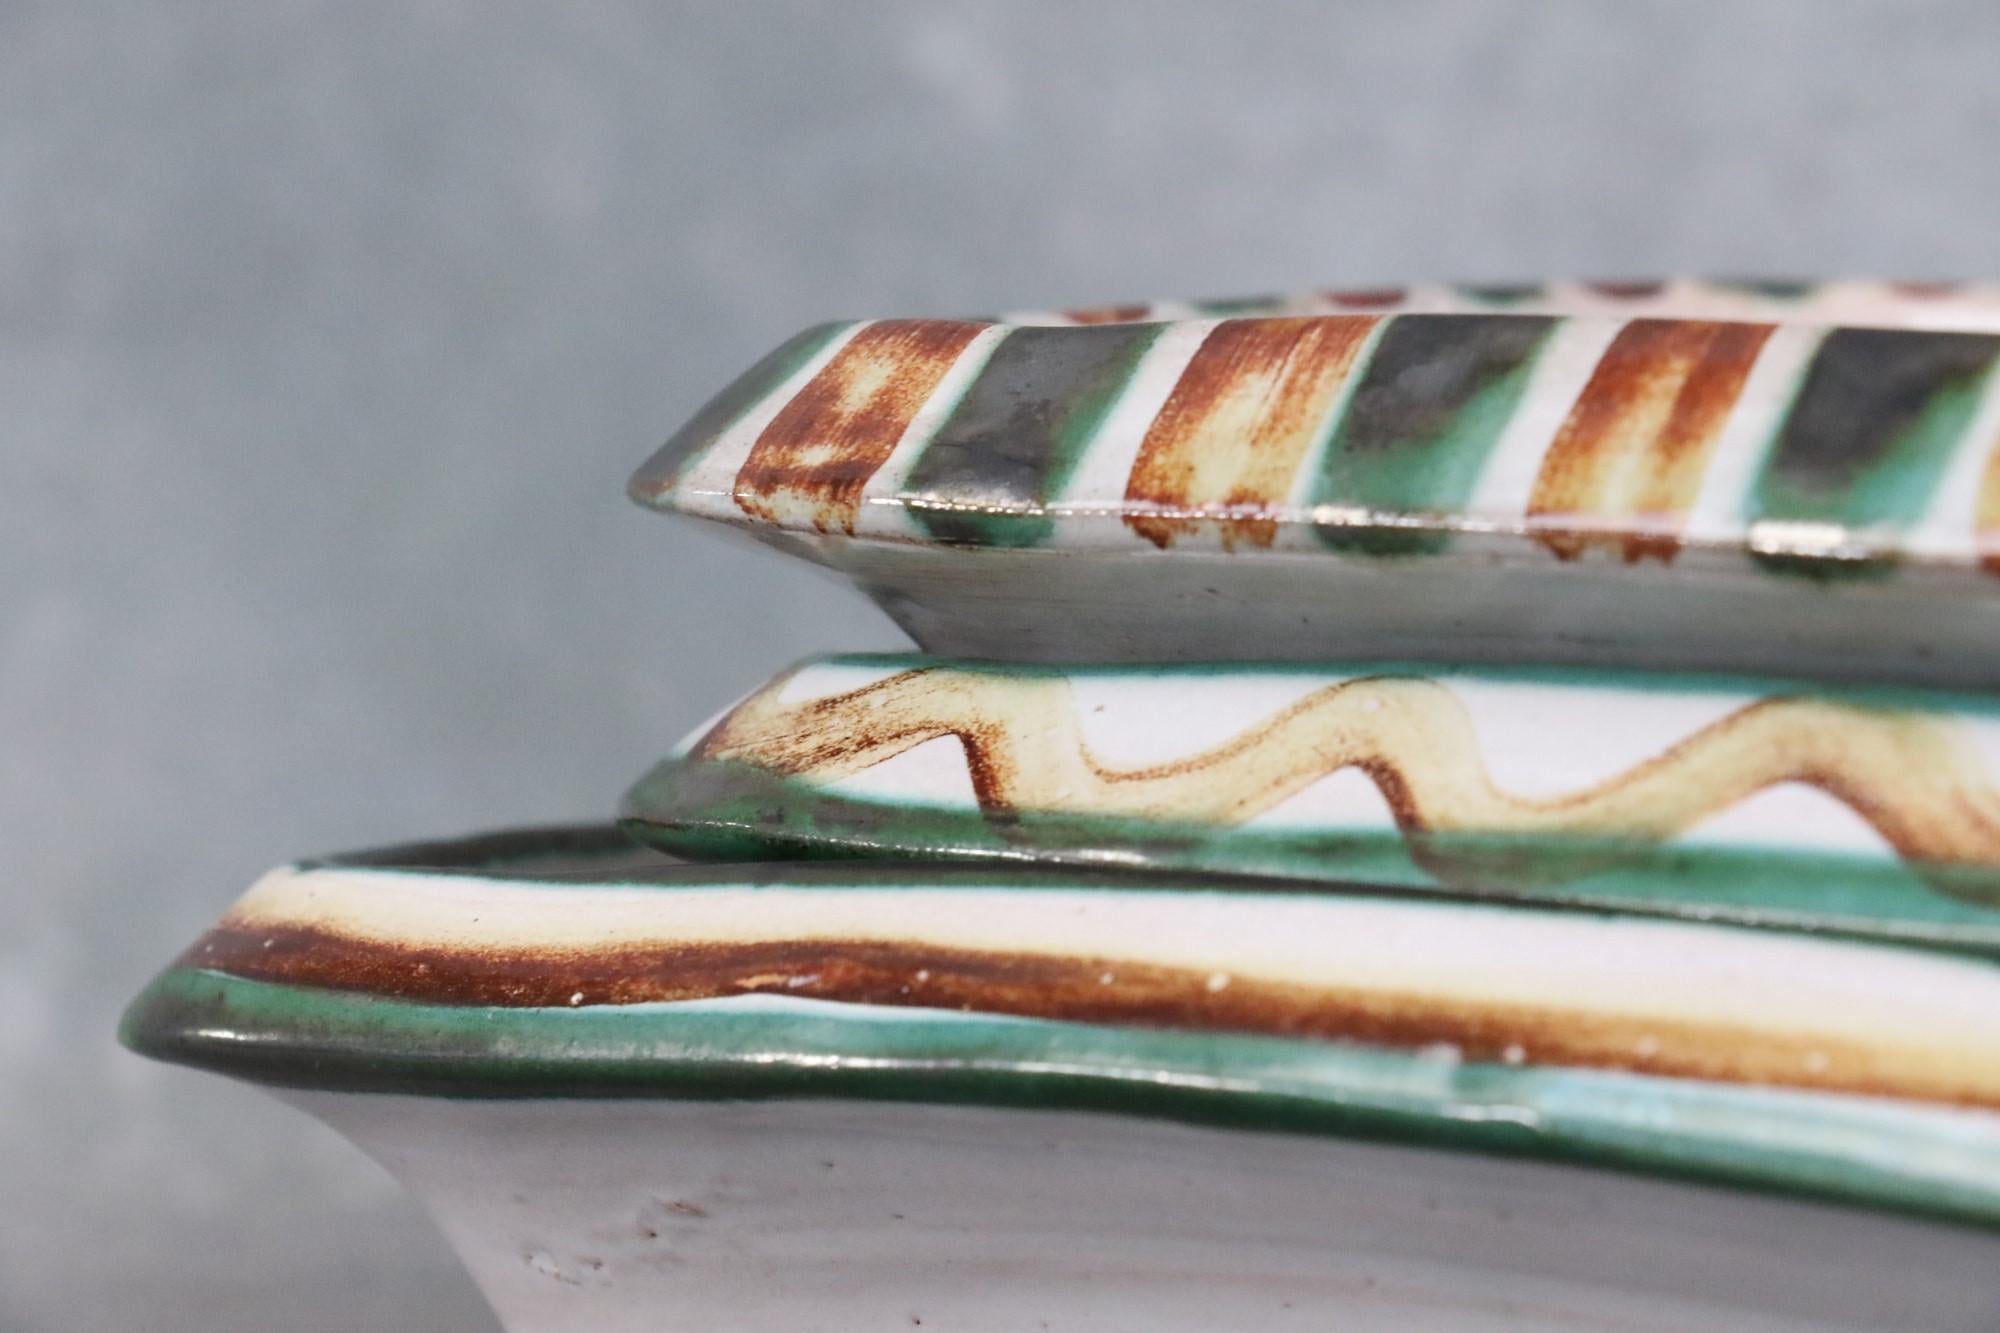 Set of 3 Ceramic Dishes by Robert Picault, Vallauris, French Ceramic, 1950's For Sale 6